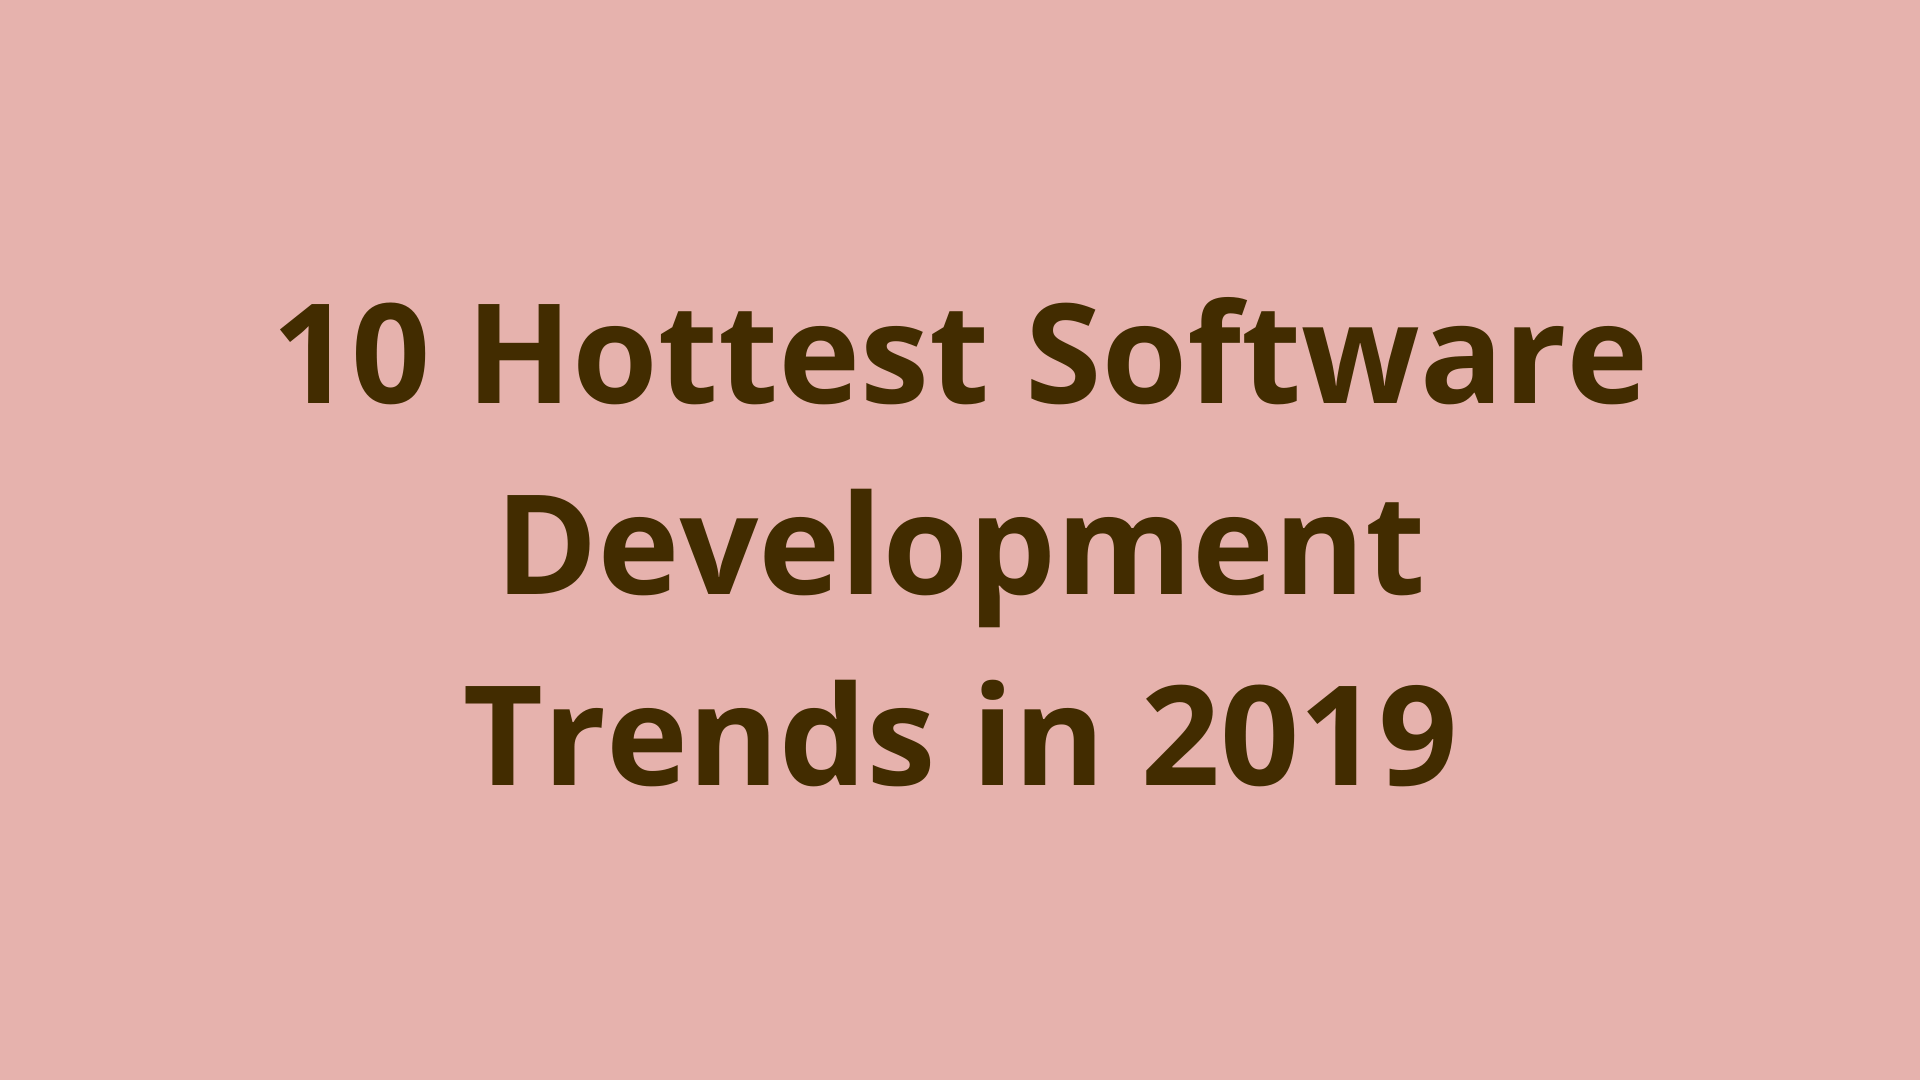 Image of 10 hottest software development trends in 2019